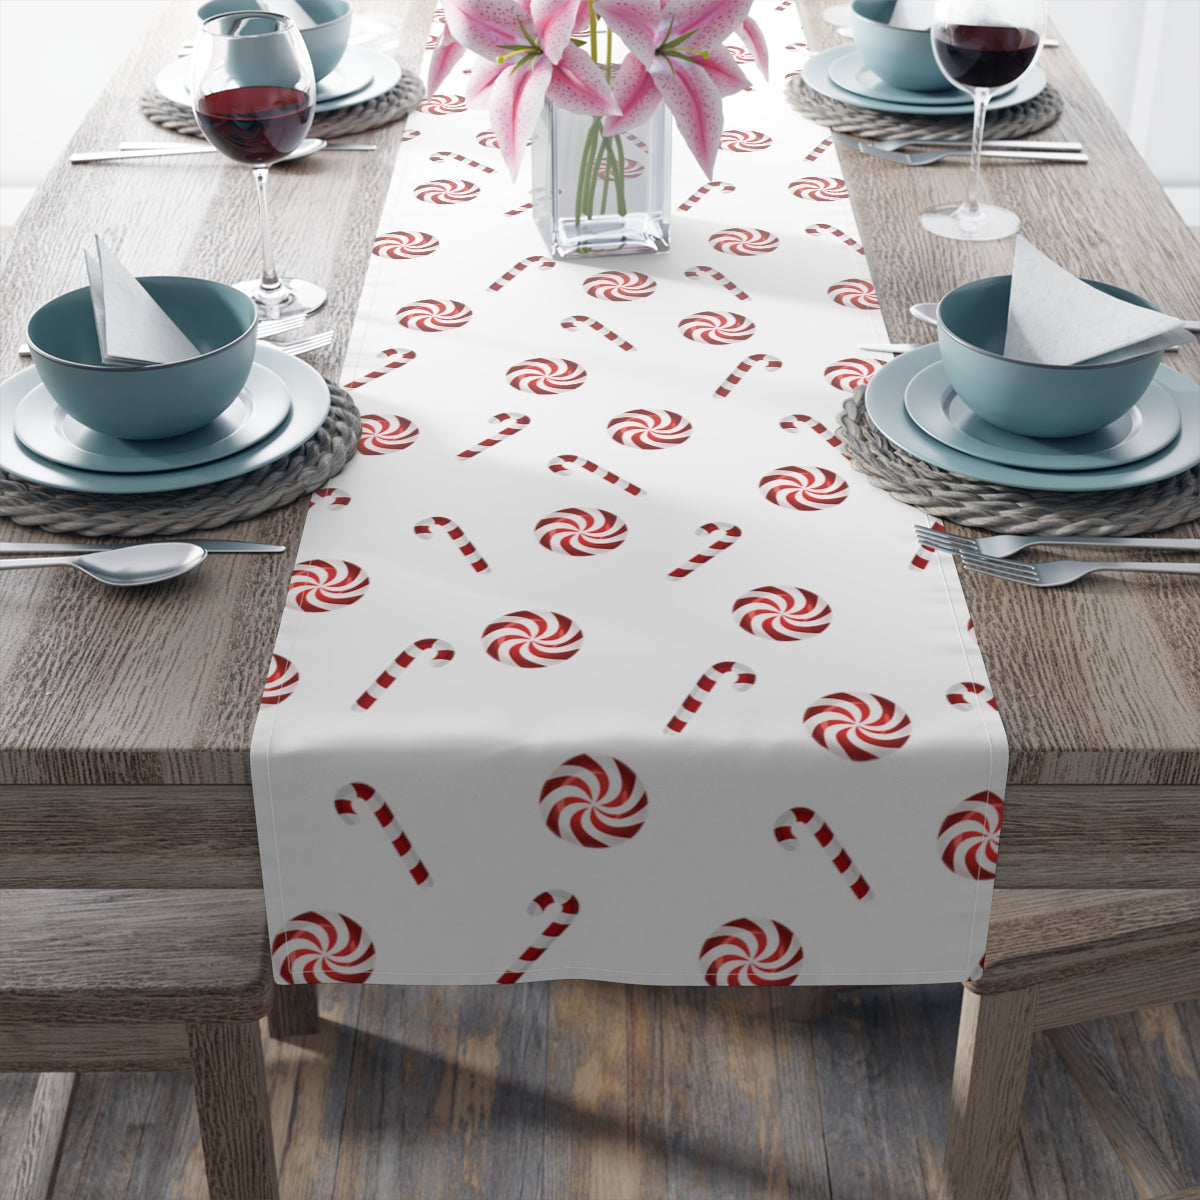 Christmas Table Runner / Candy Cane Decor